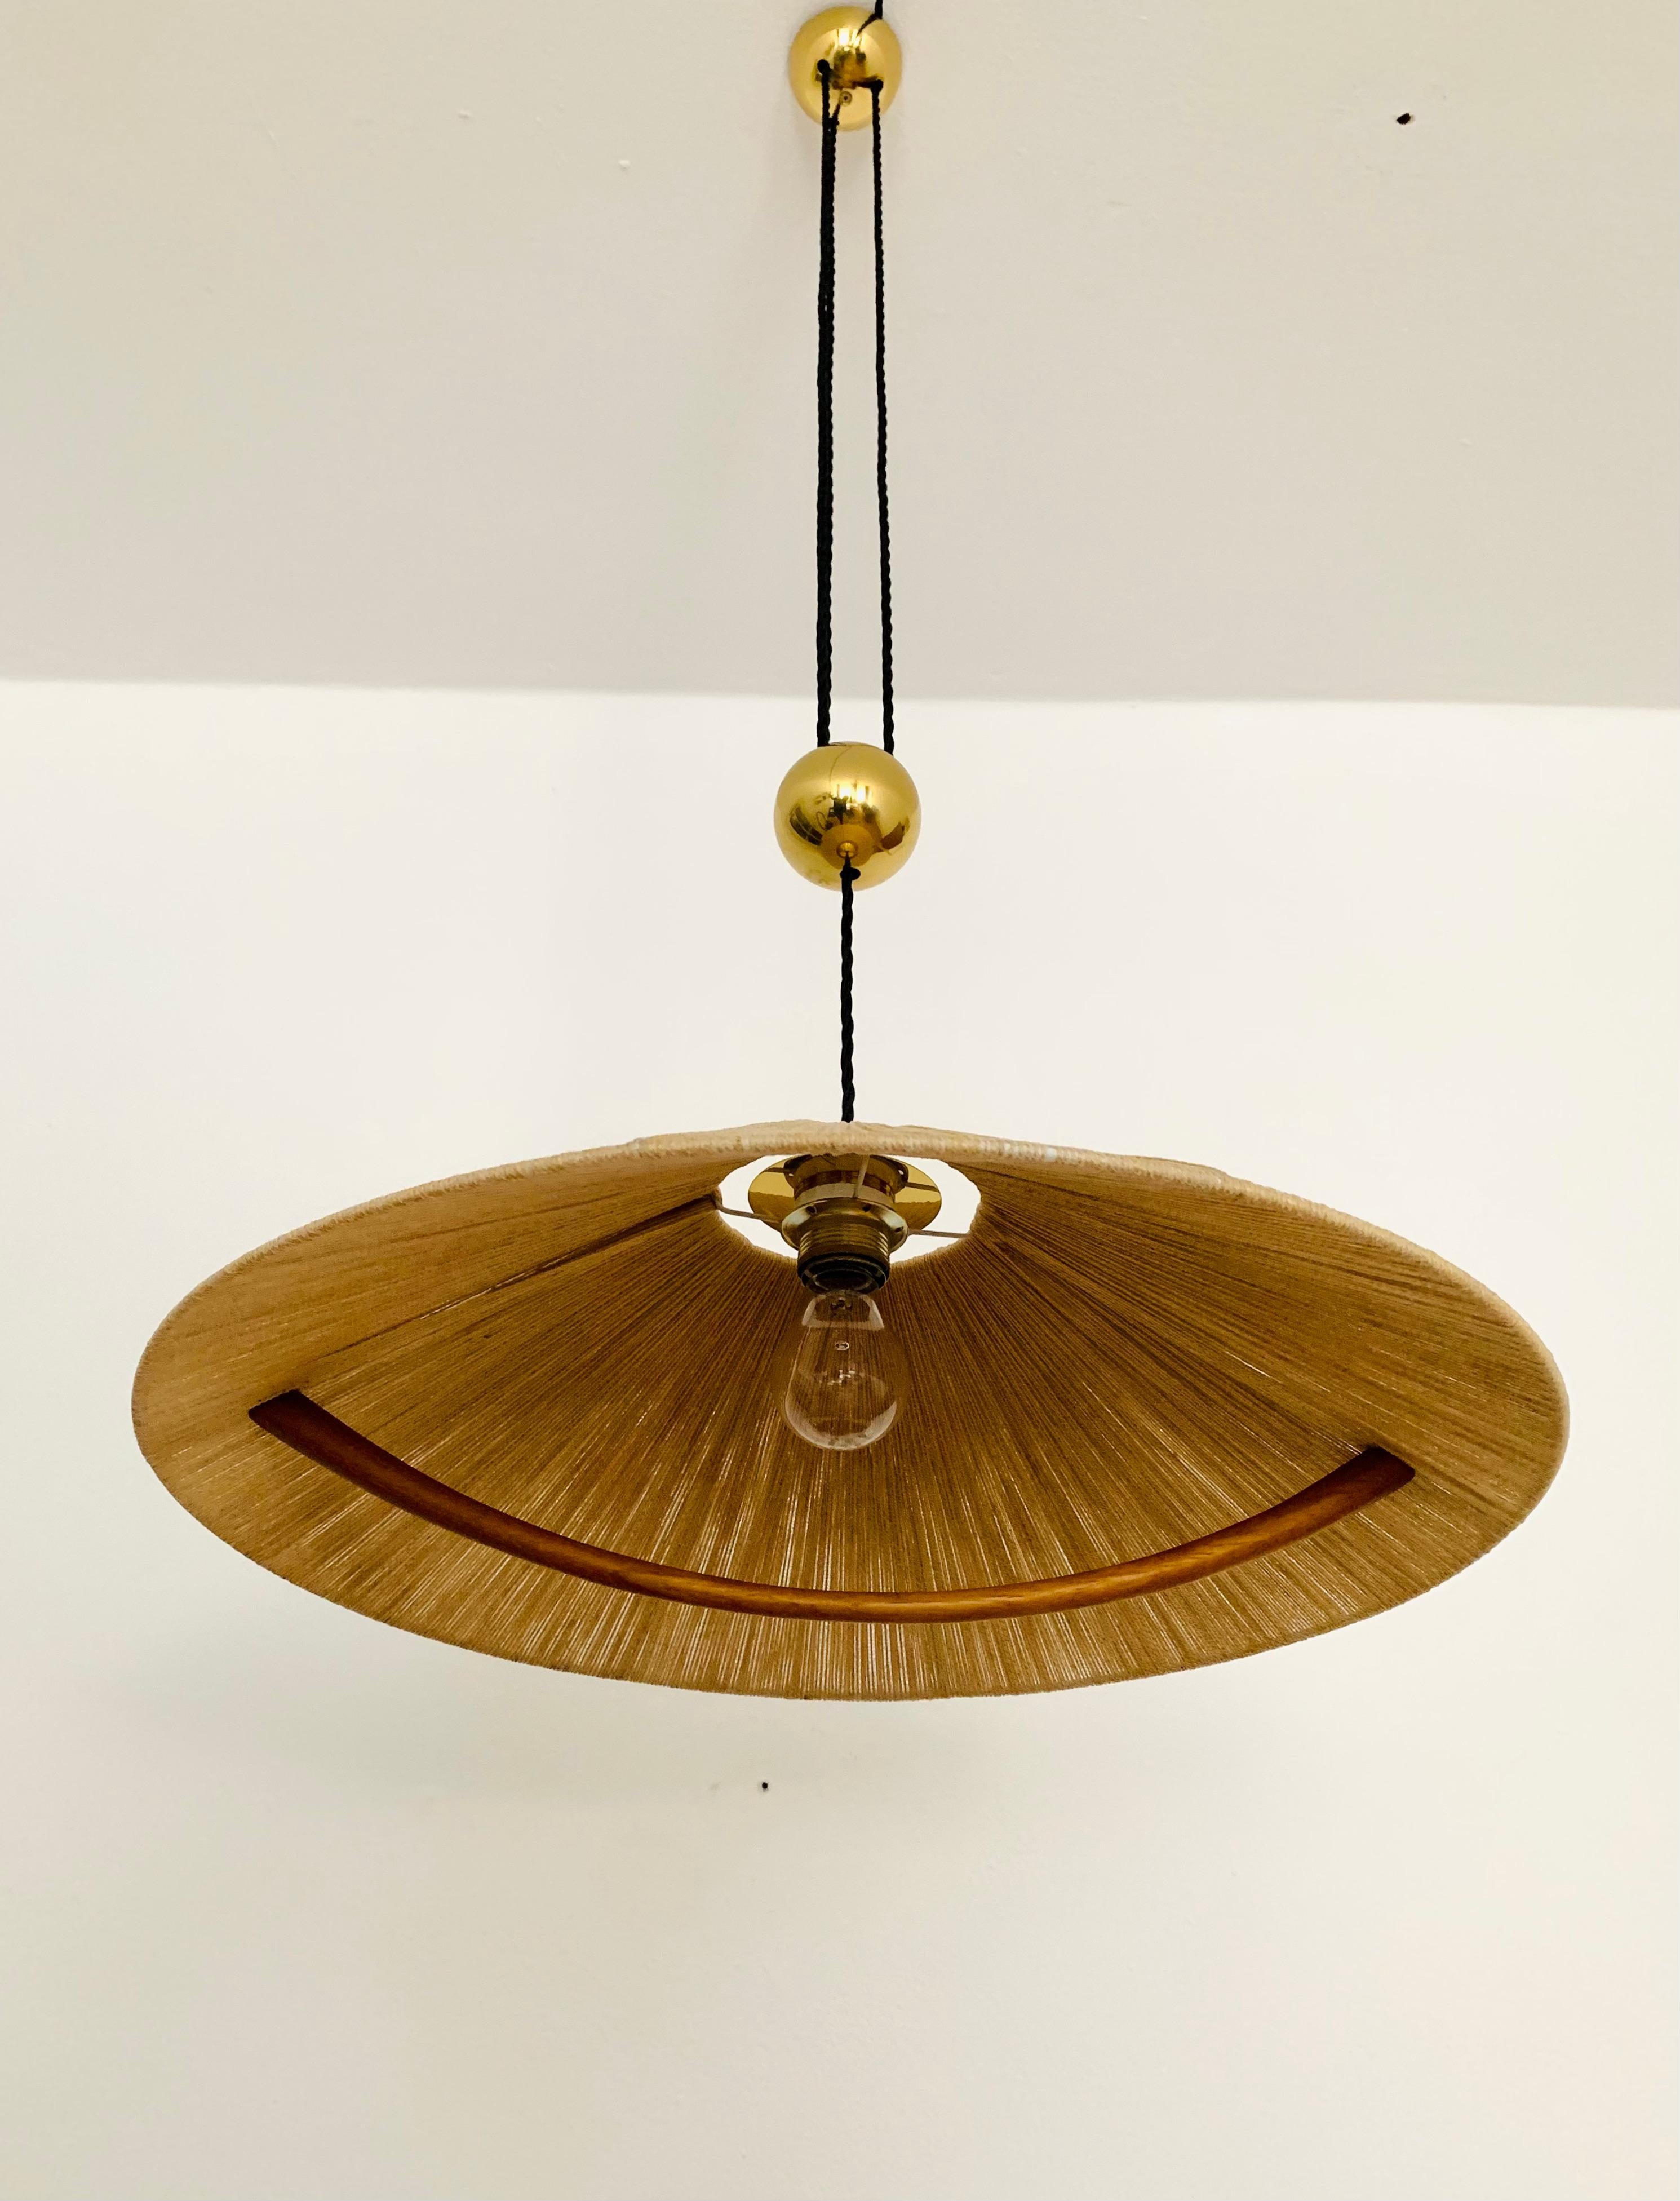 Teak Adjustable Pendant Lamp with Counterweight by Florian Schulz For Sale